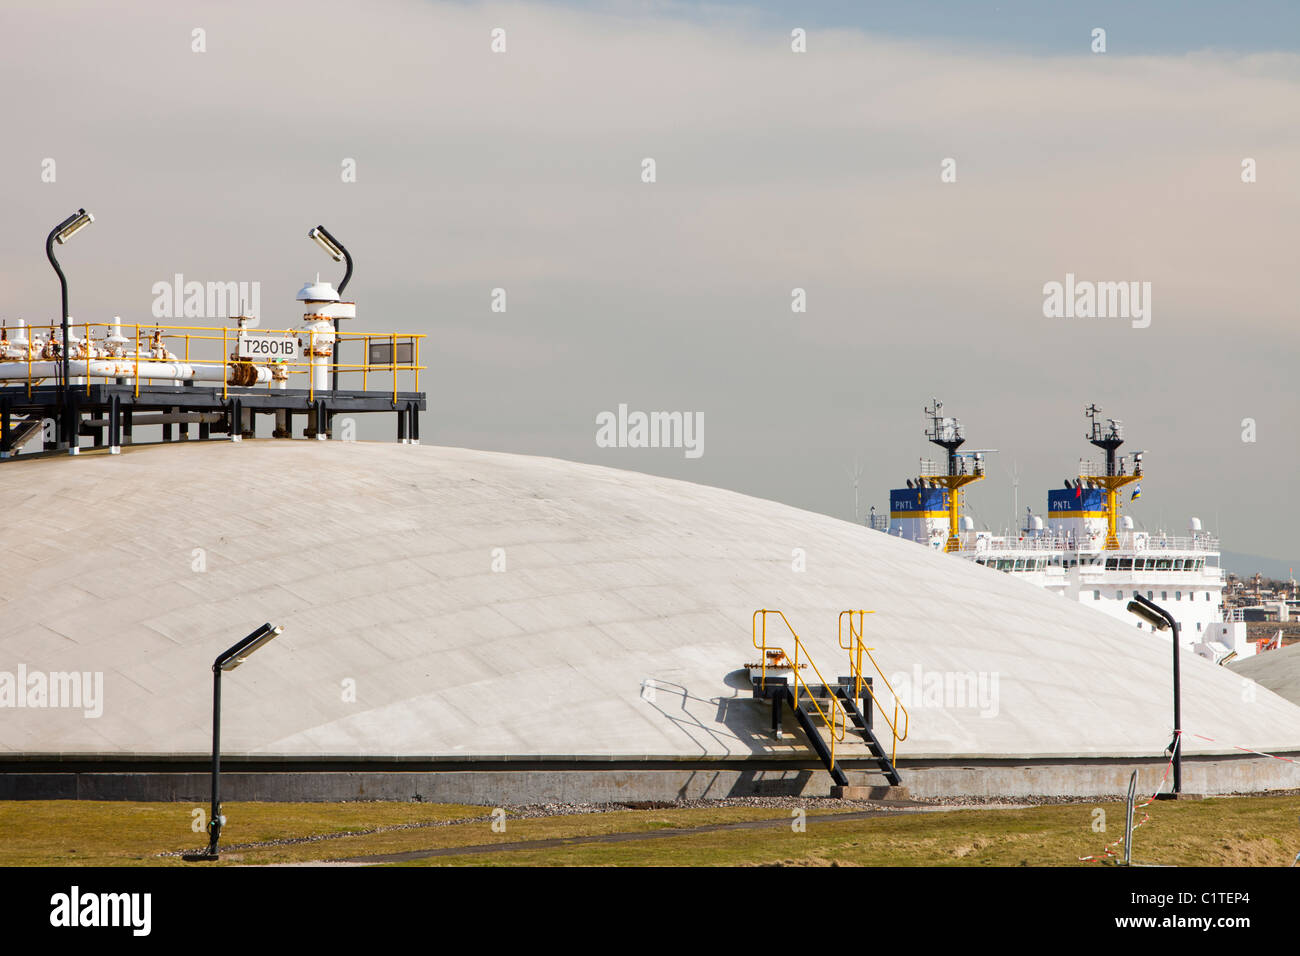 A Centrica Gas Condensate storage plant at Barrow in Furness, Cumbria, UK, that stores natural gas from the Morecambe Bay gas Stock Photo